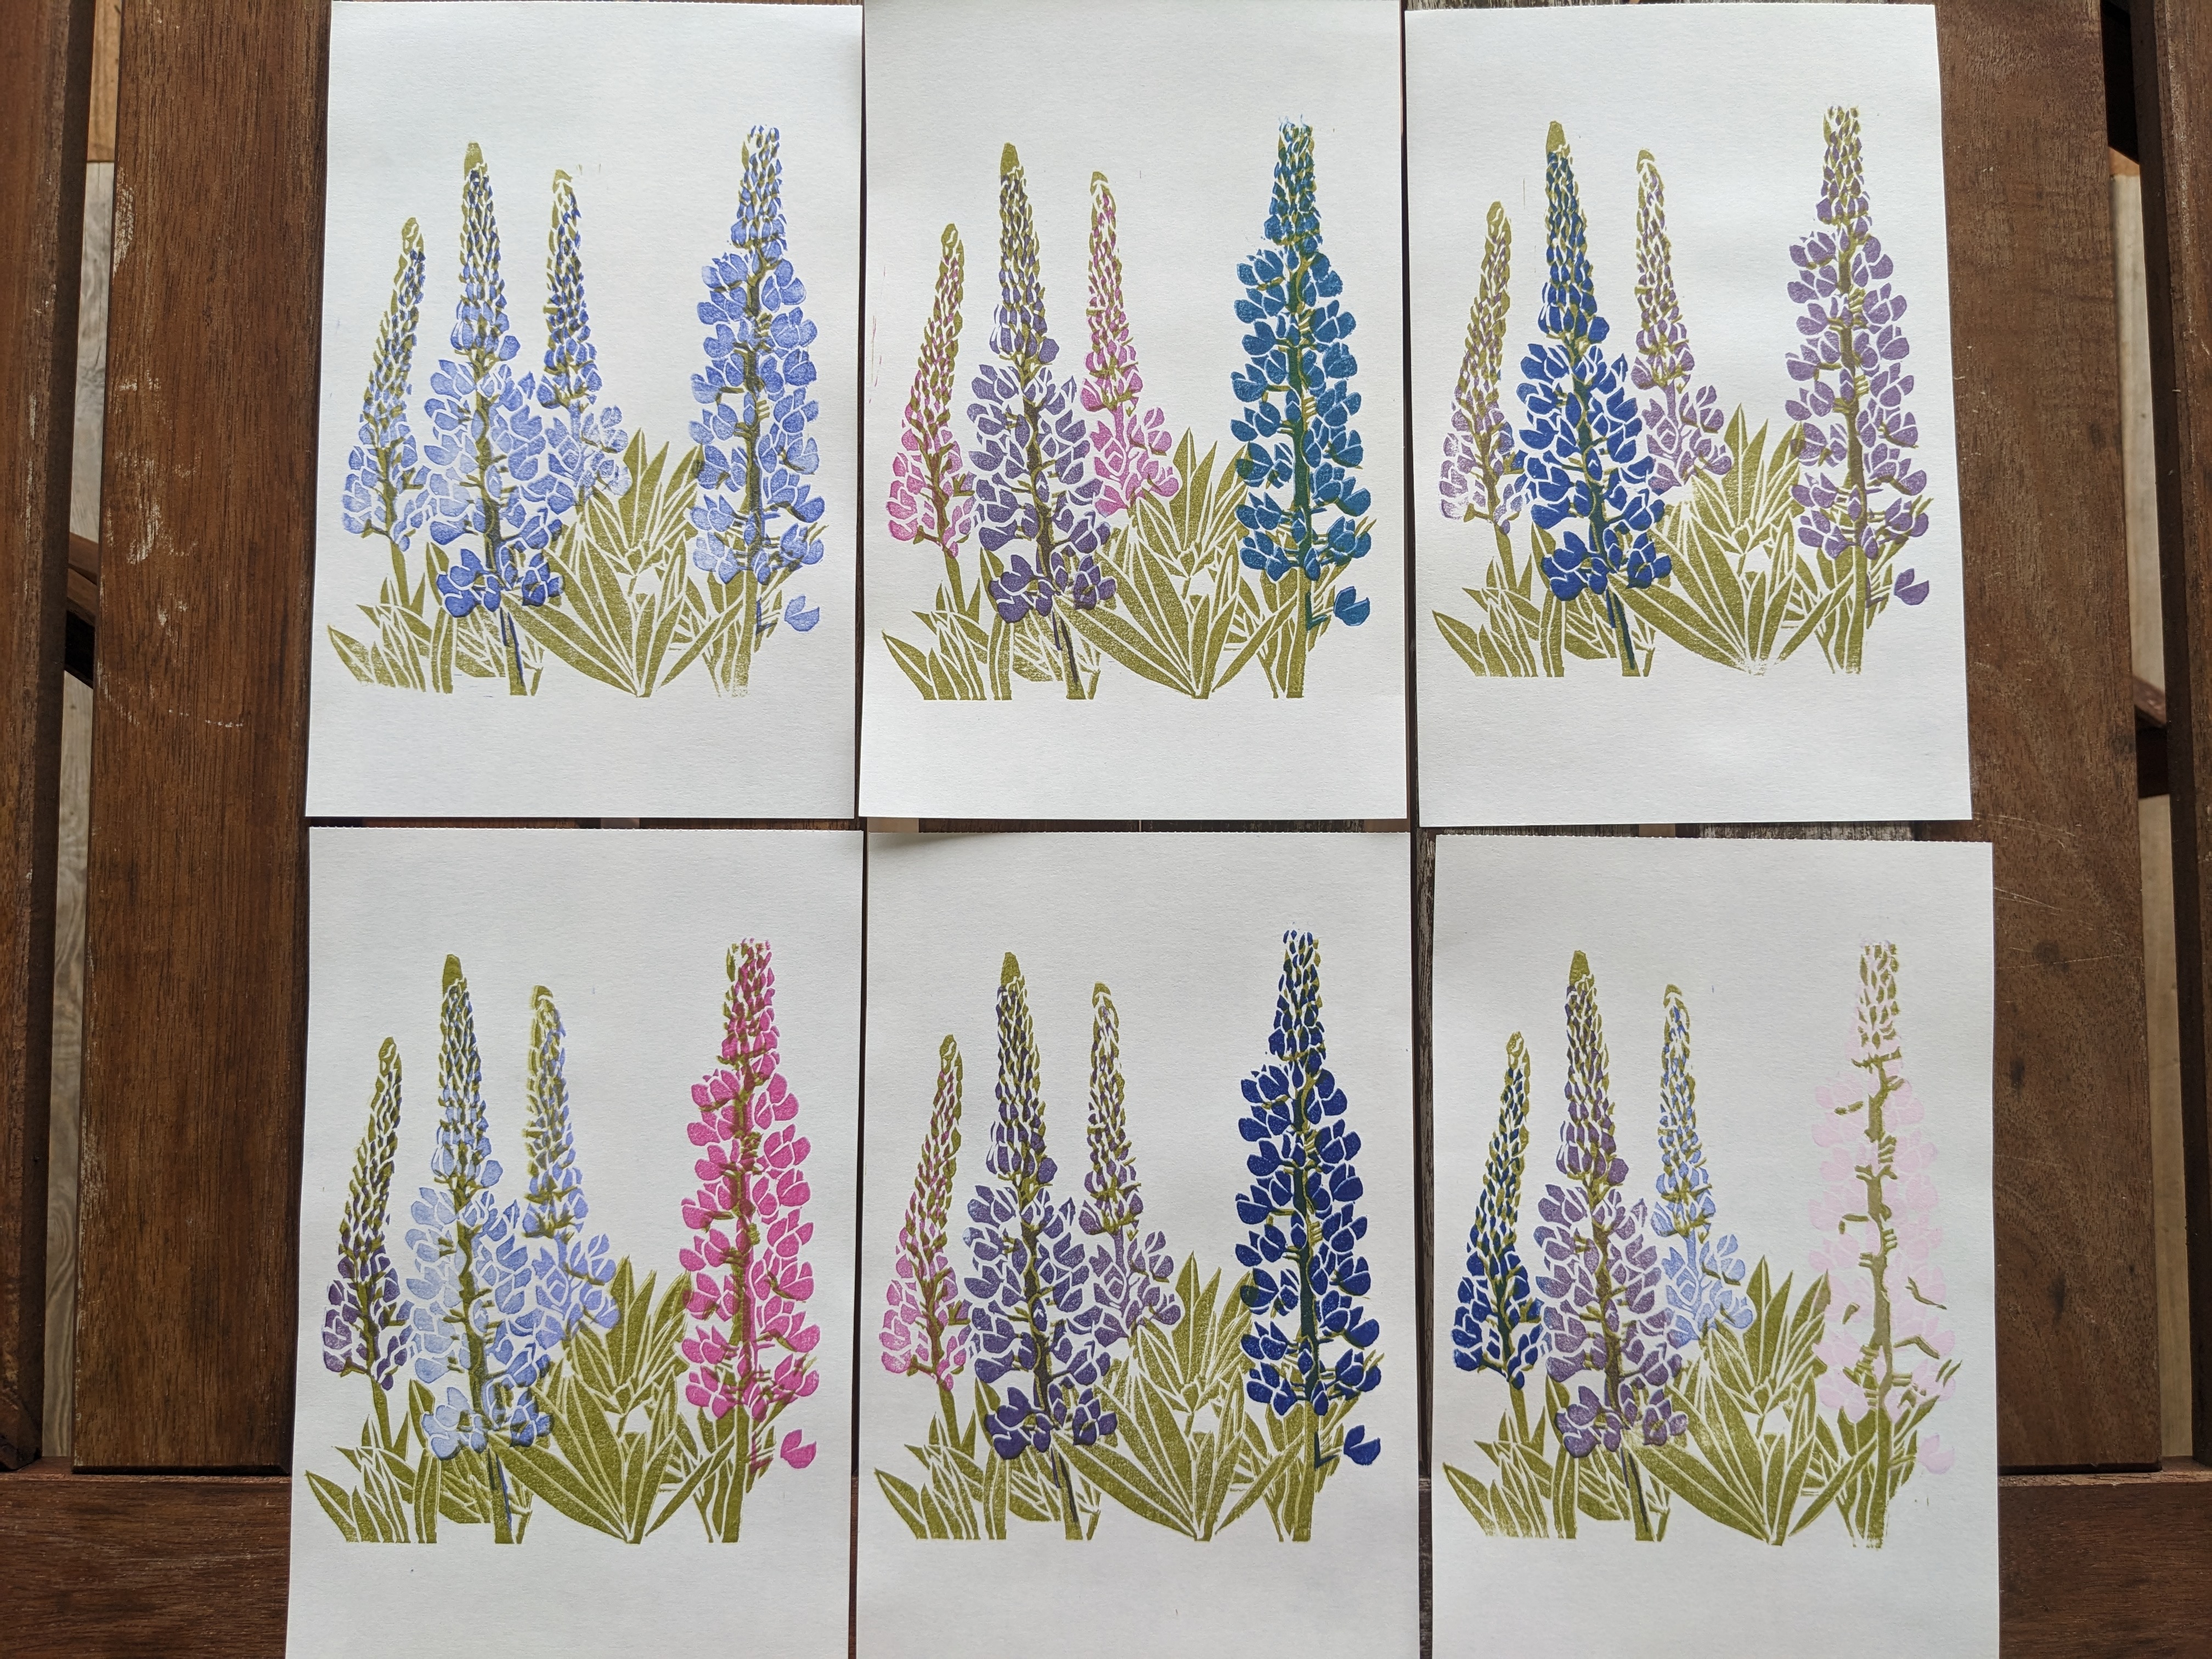 6 versions of a print of lupine flowers with the leaves inked in light green and the blossoms inked in a variety of blues, purples, and pinks.